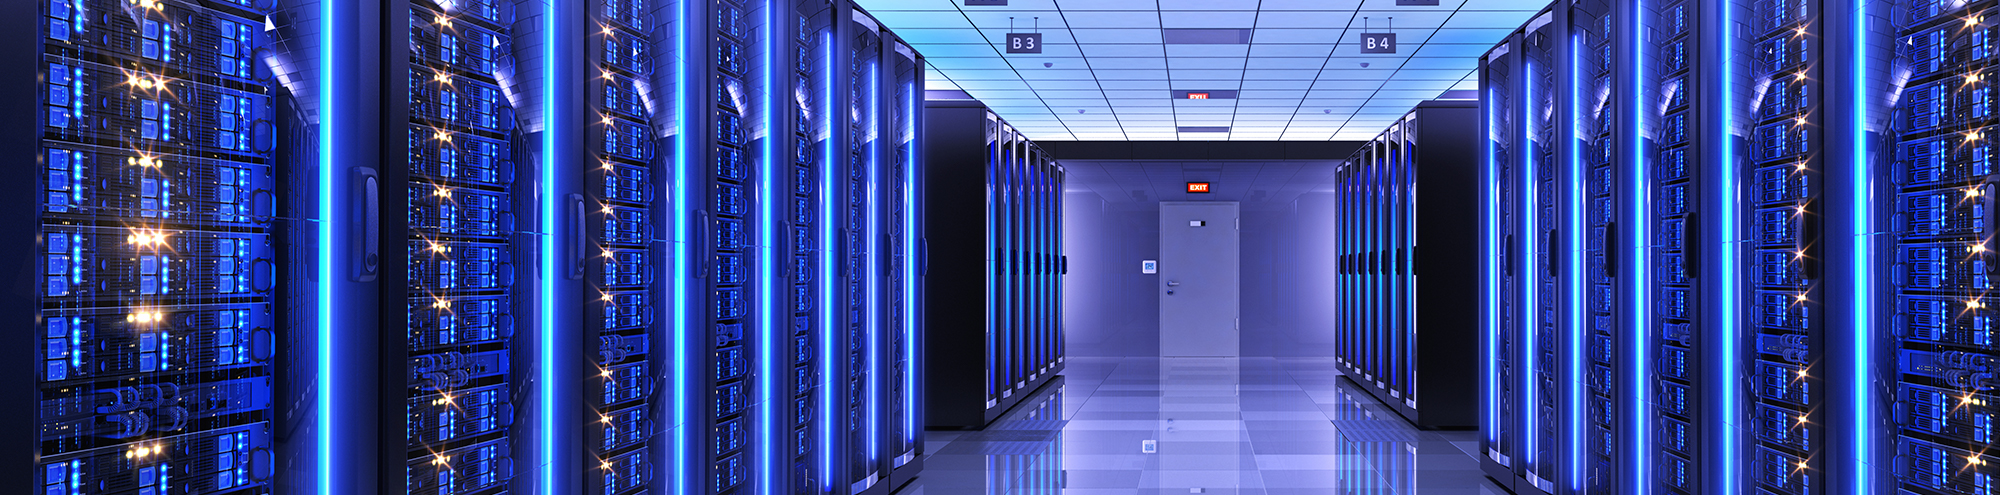 Stylised image of a server room